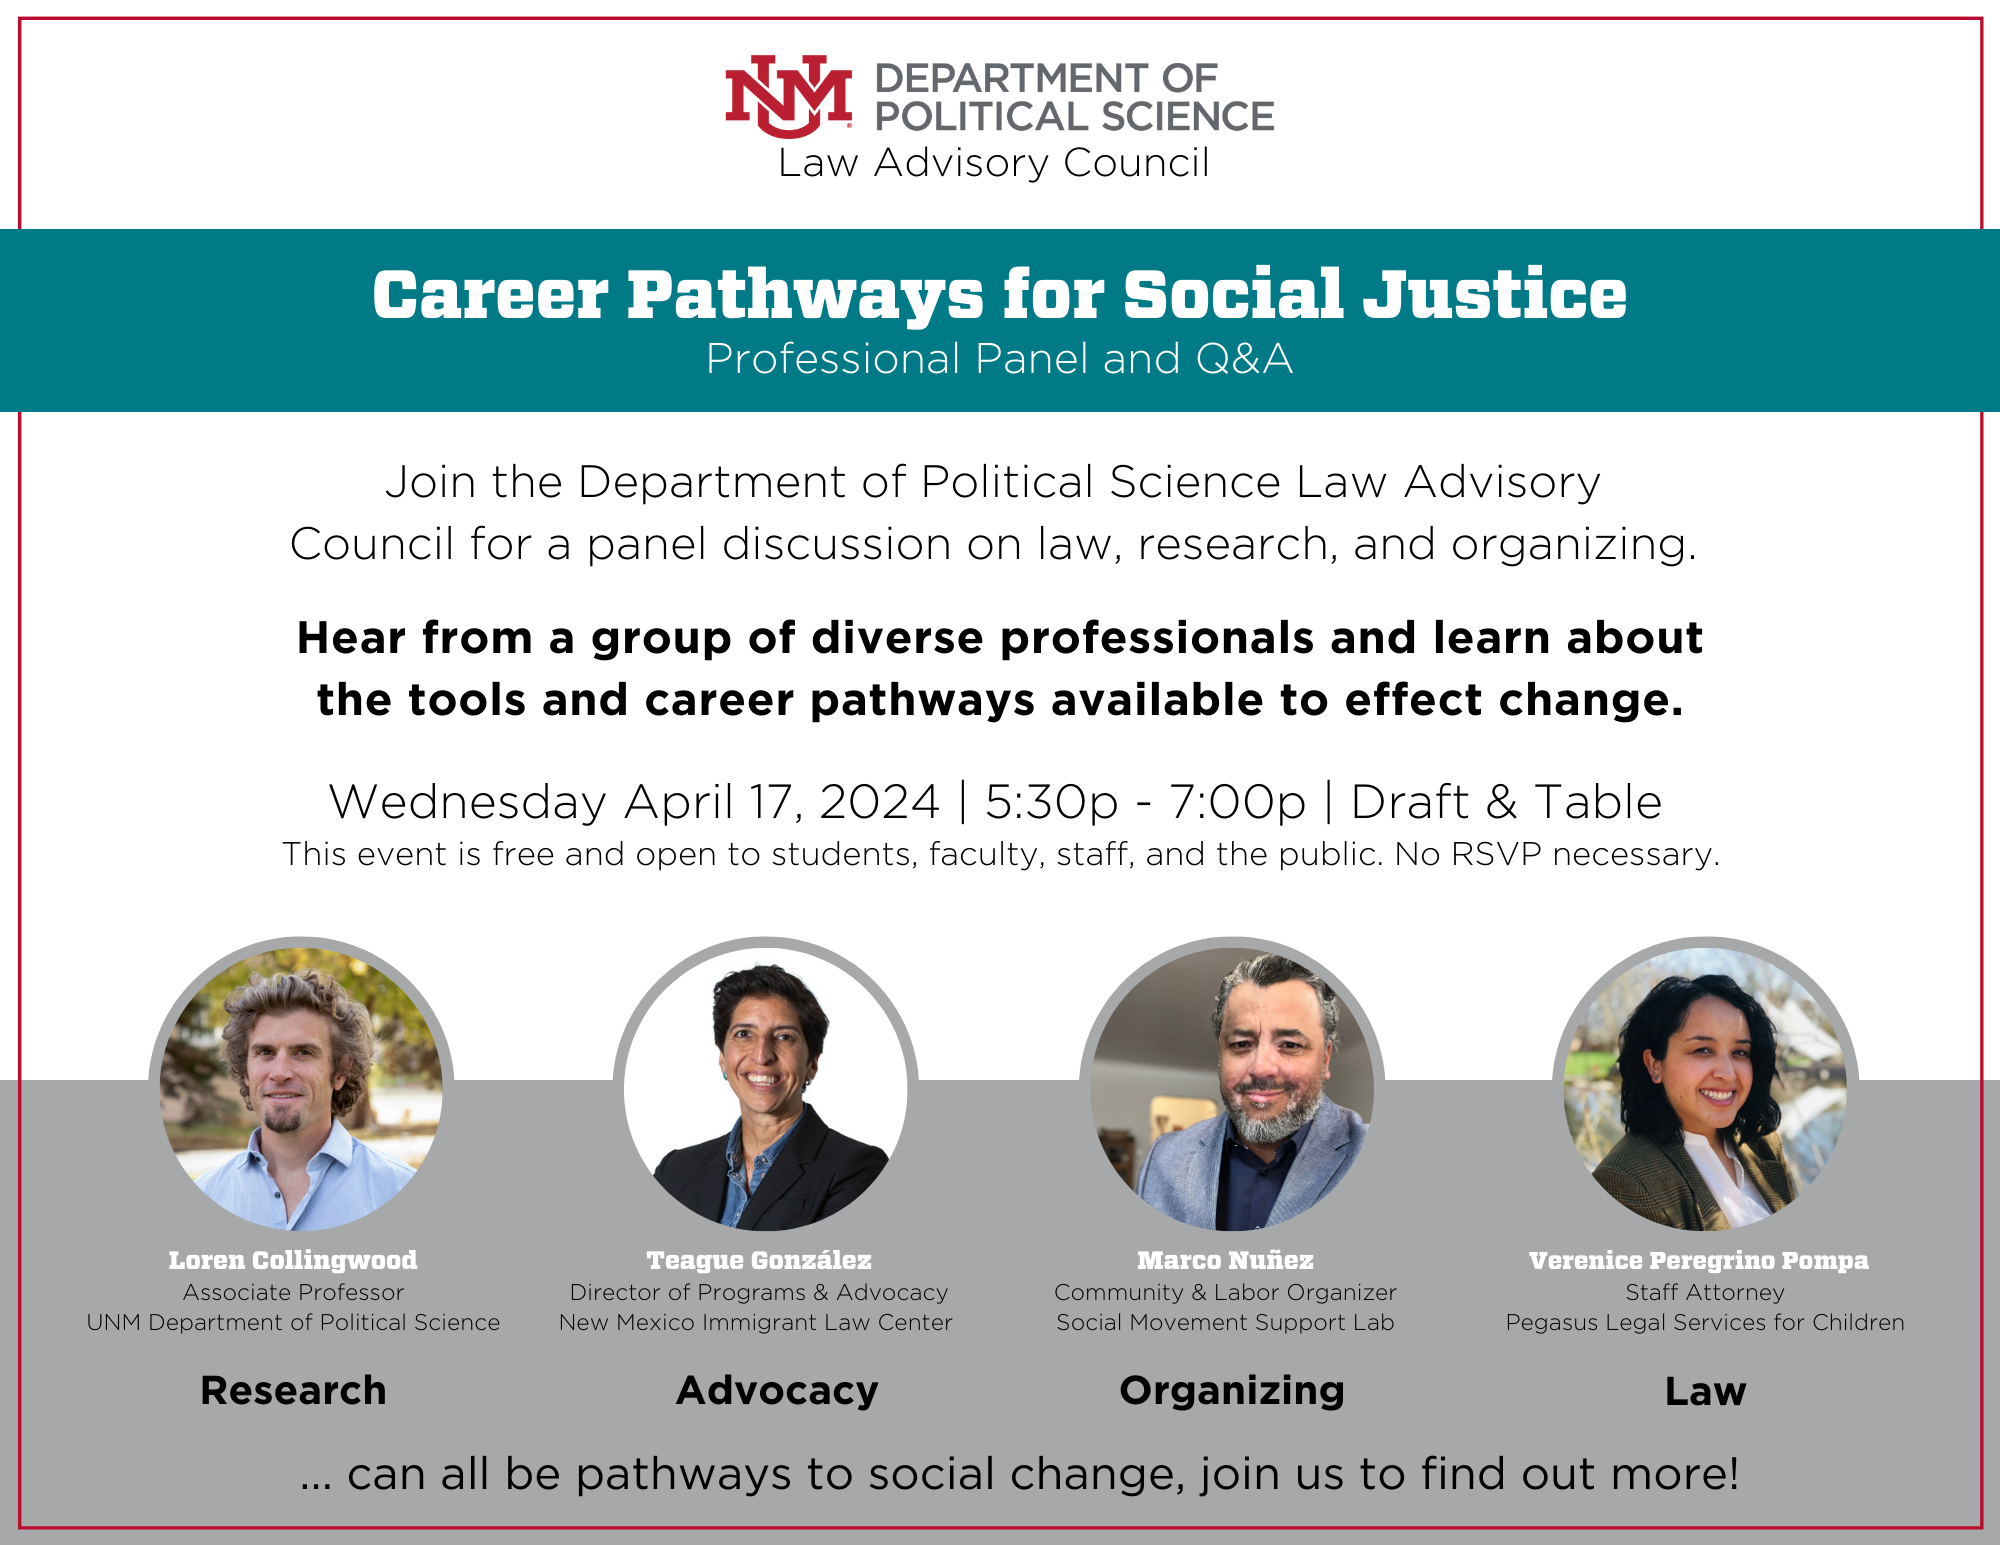 lac-career-pathways-for-social-justice.png